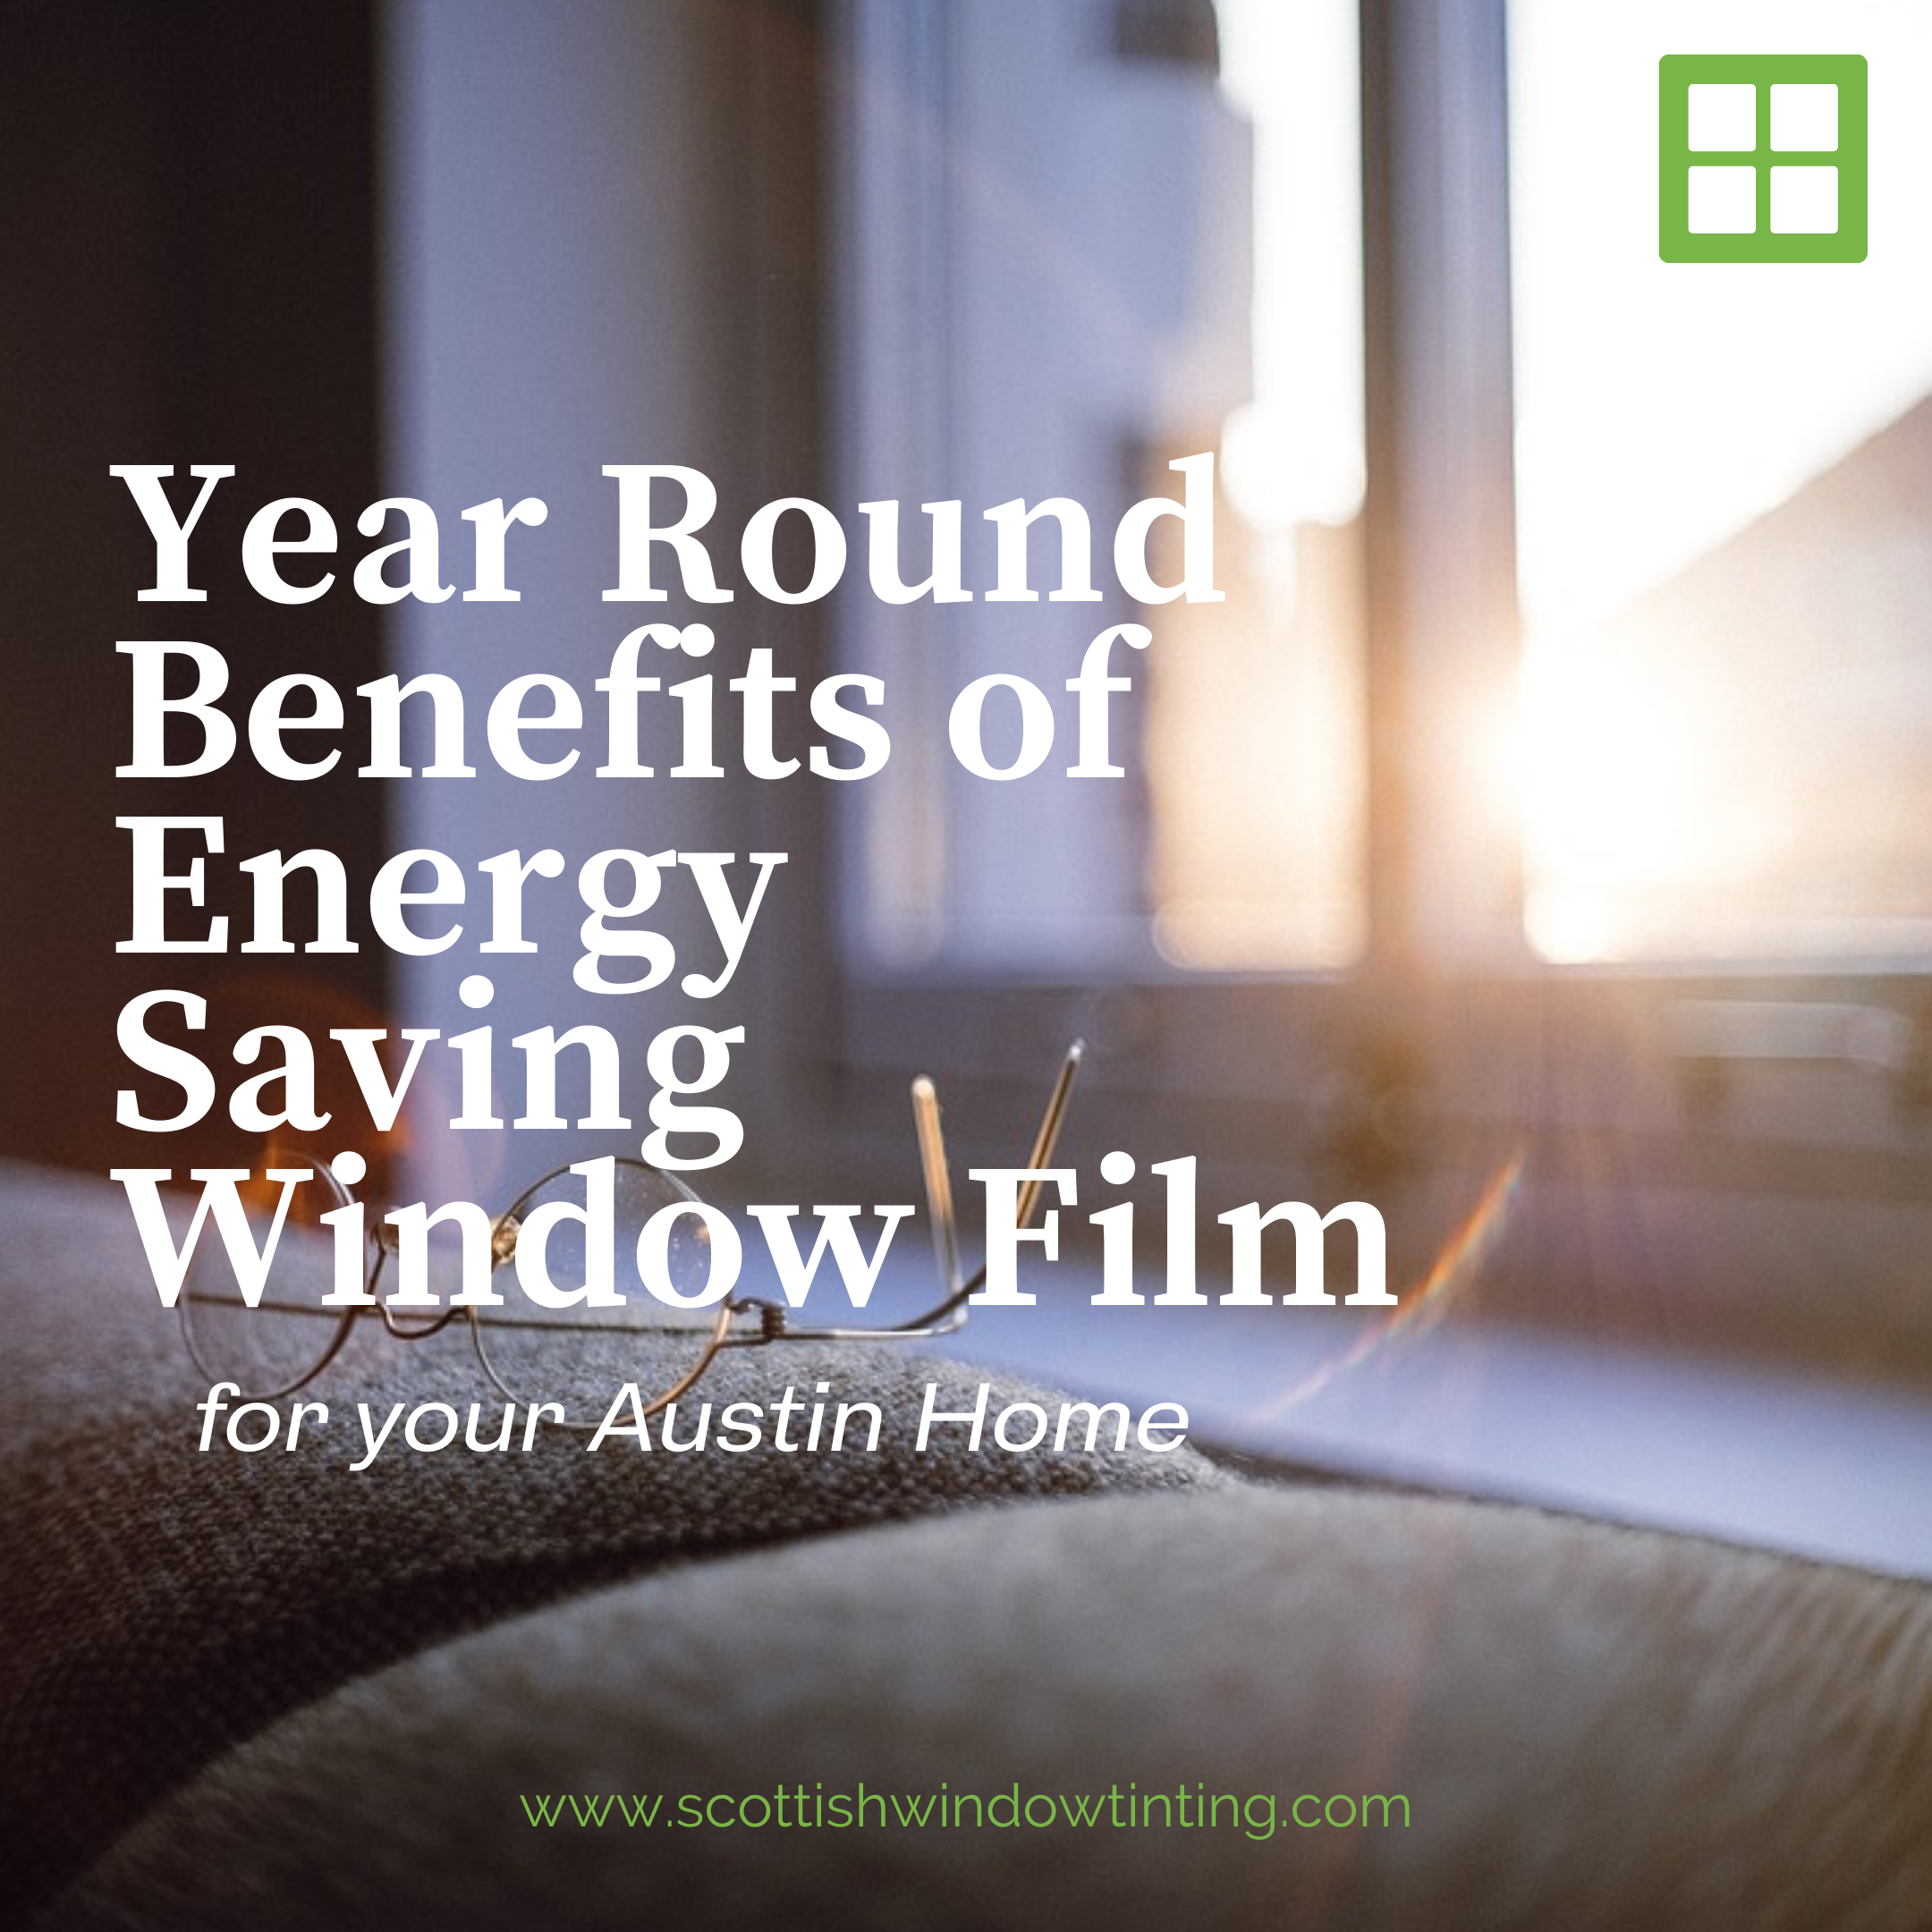 Year Round Benefits of Energy Saving Window Film for your Austin Home